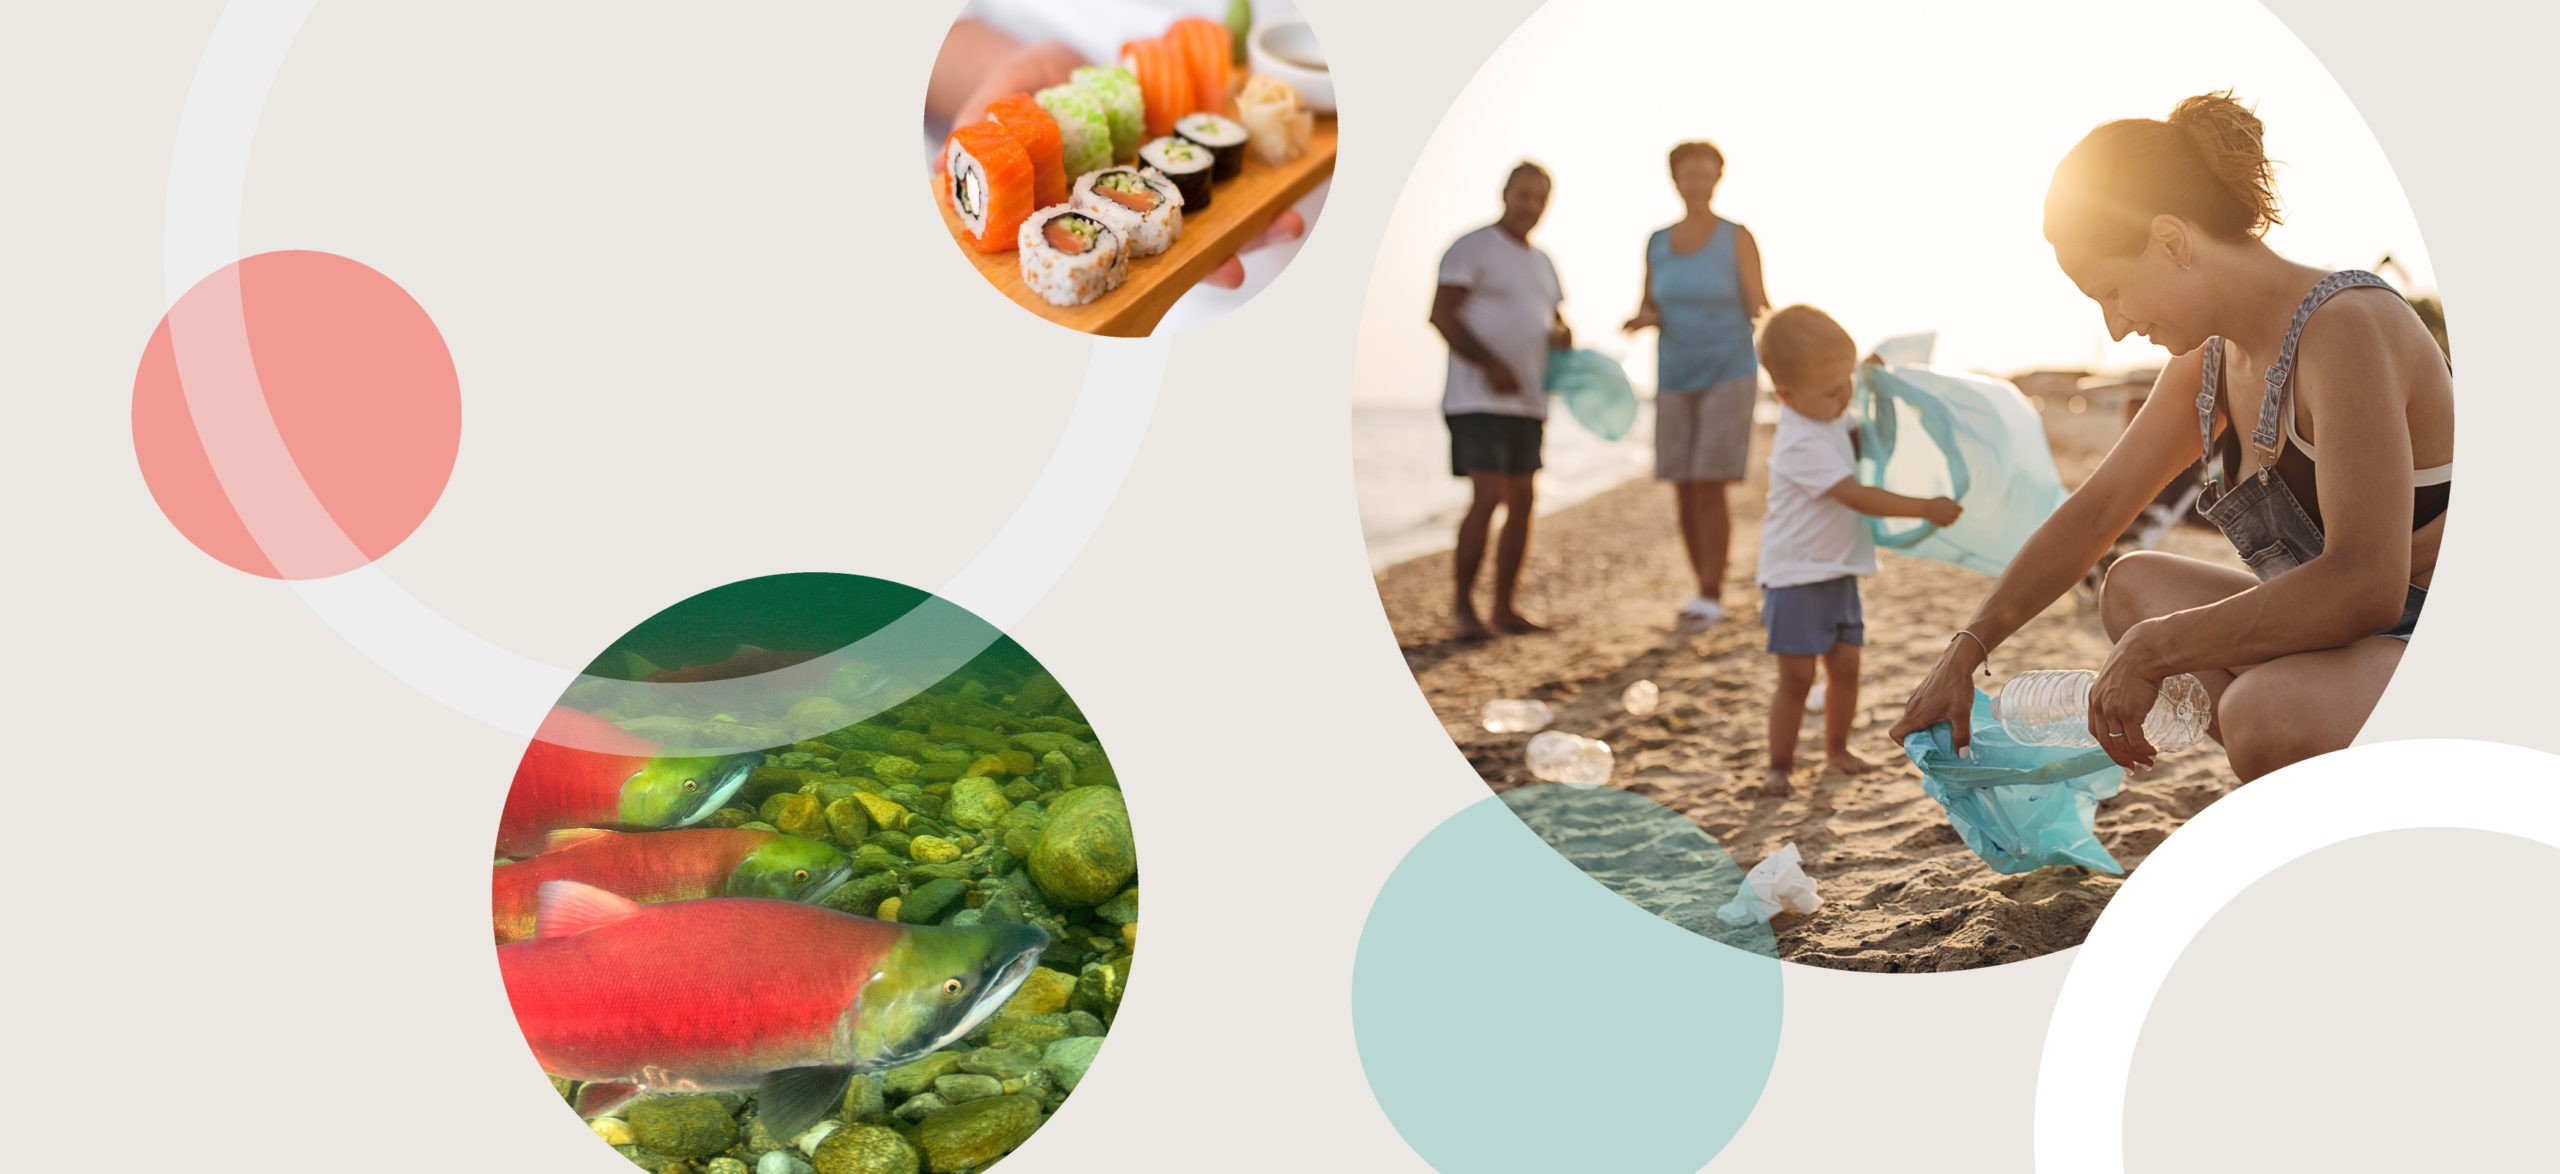 A collage showing a family cleaning up at the beach, a plate of sushi, sockeye salmon spawning